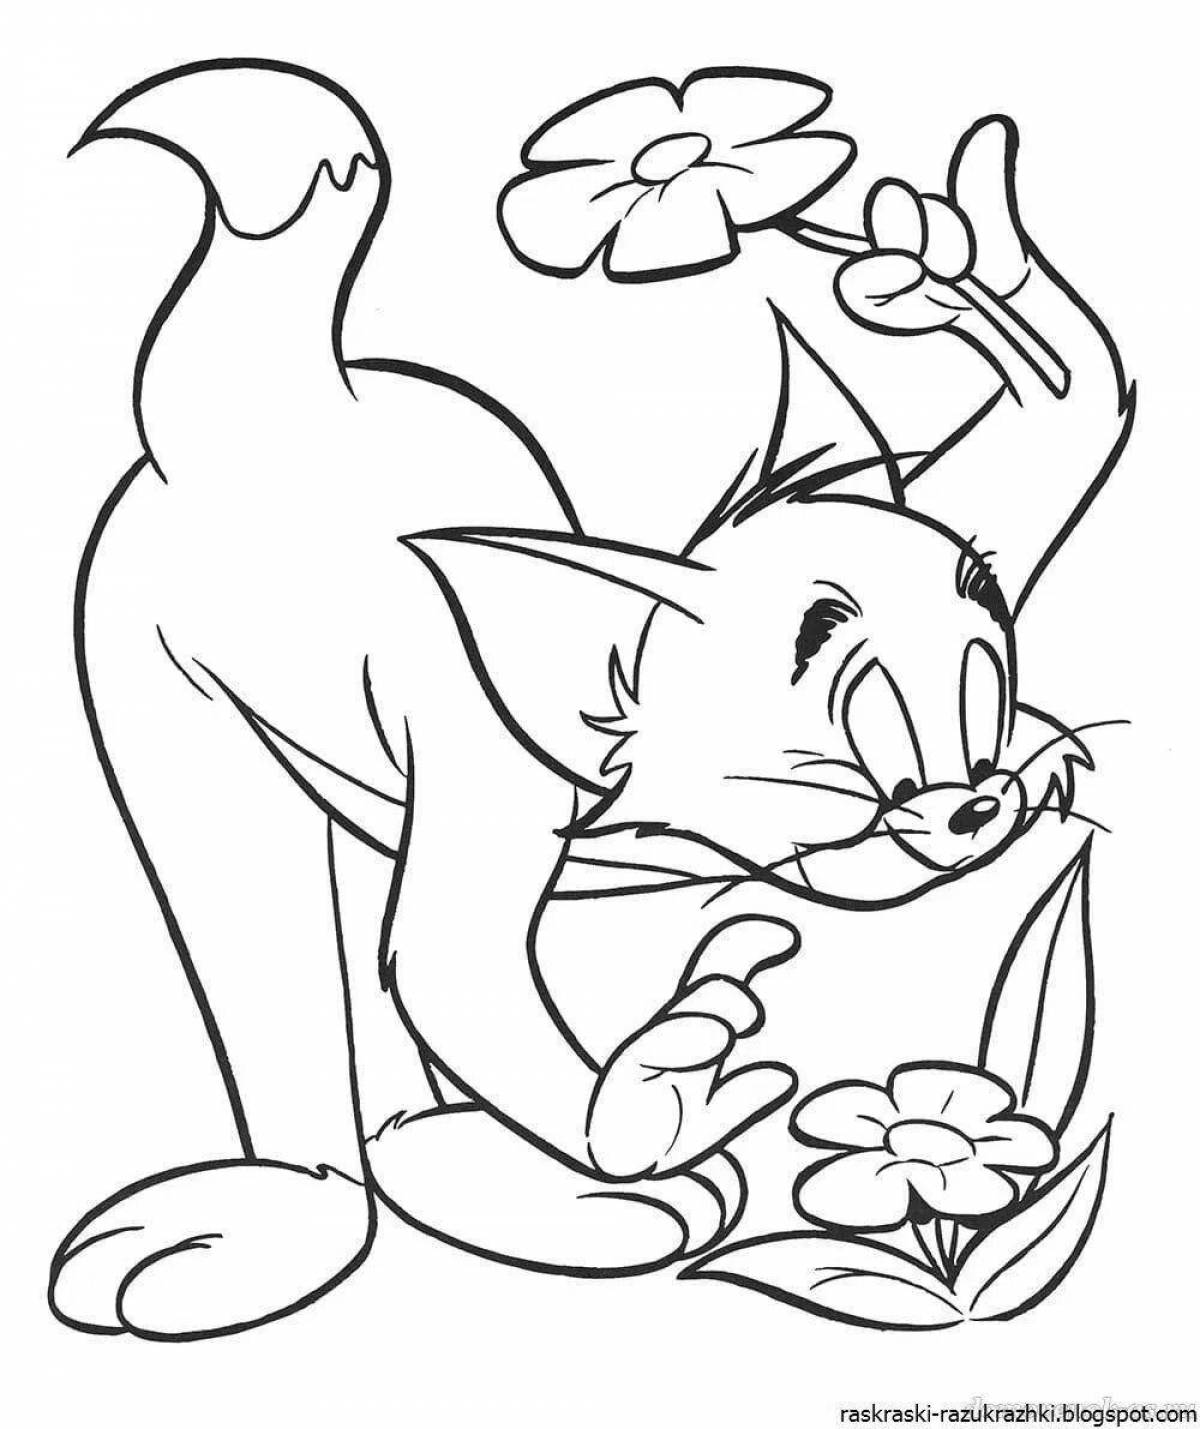 Creative coloring page drawing